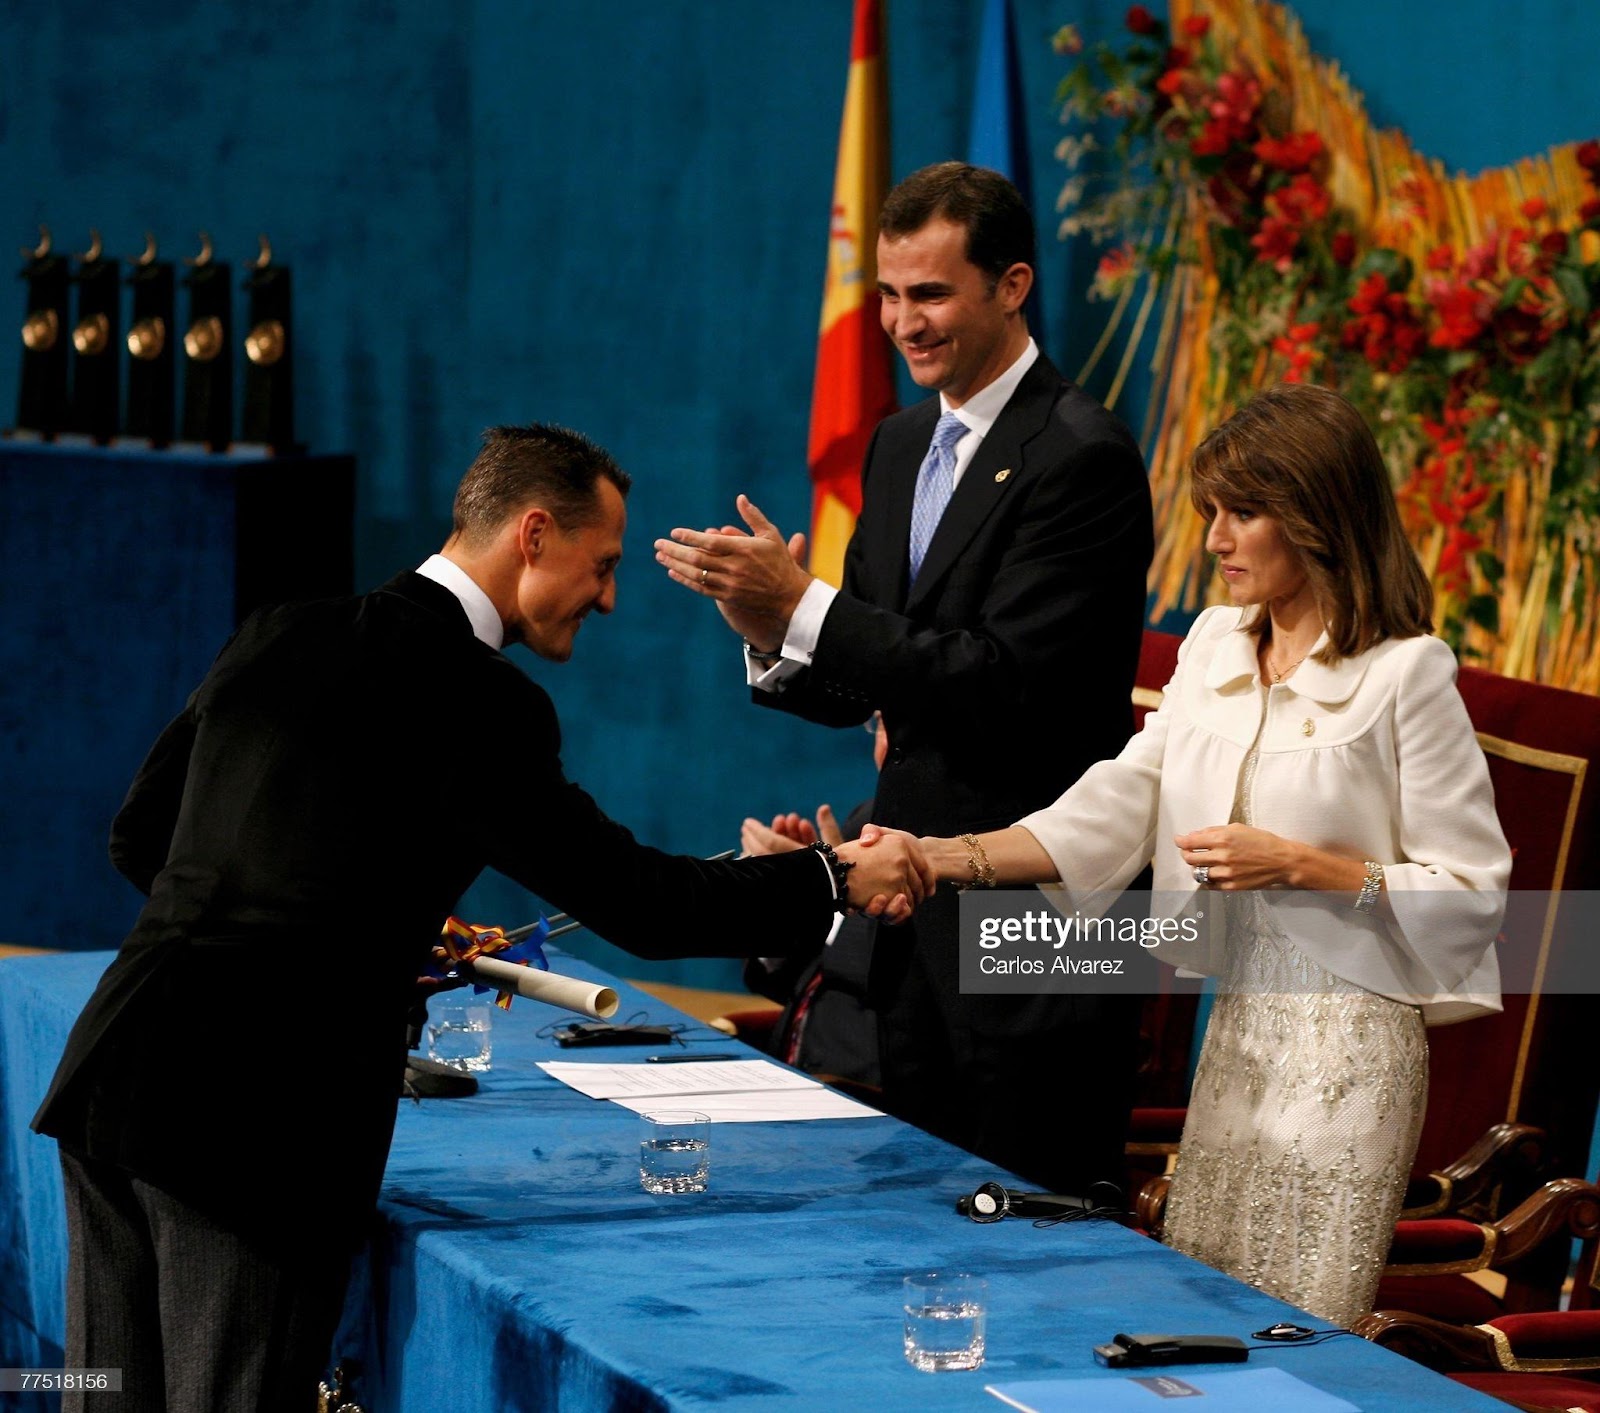 Michael Schumacher receives from Princess Letizia of Spain the Sport Award during Prince of Asturias Award Ceremony on October 26, 2007 at the 